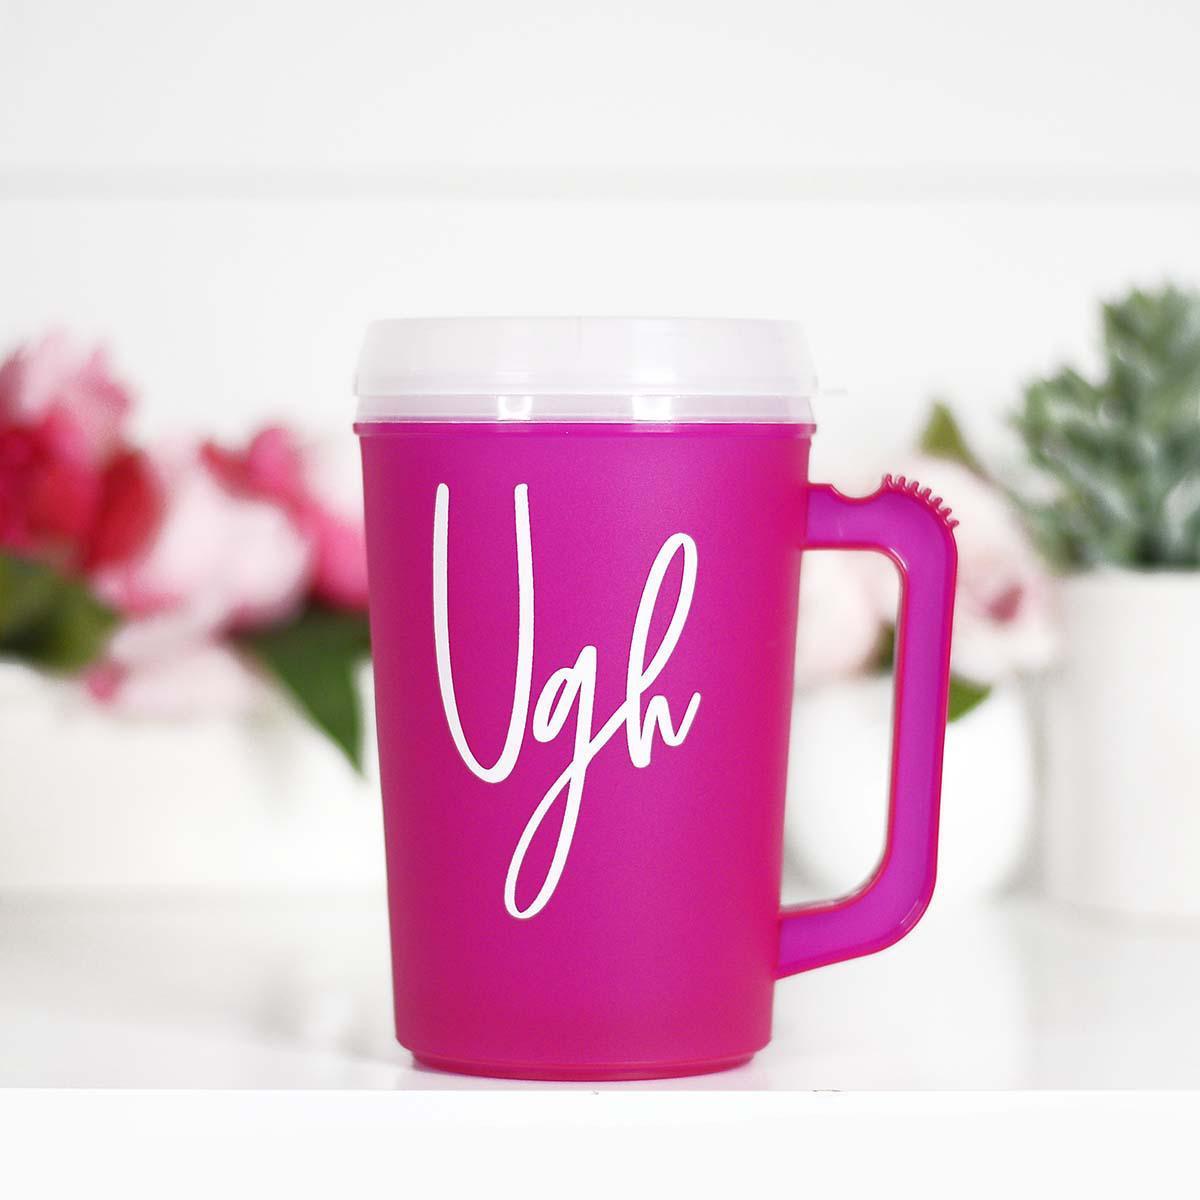 Thermal Insulated Retro UGH Cup